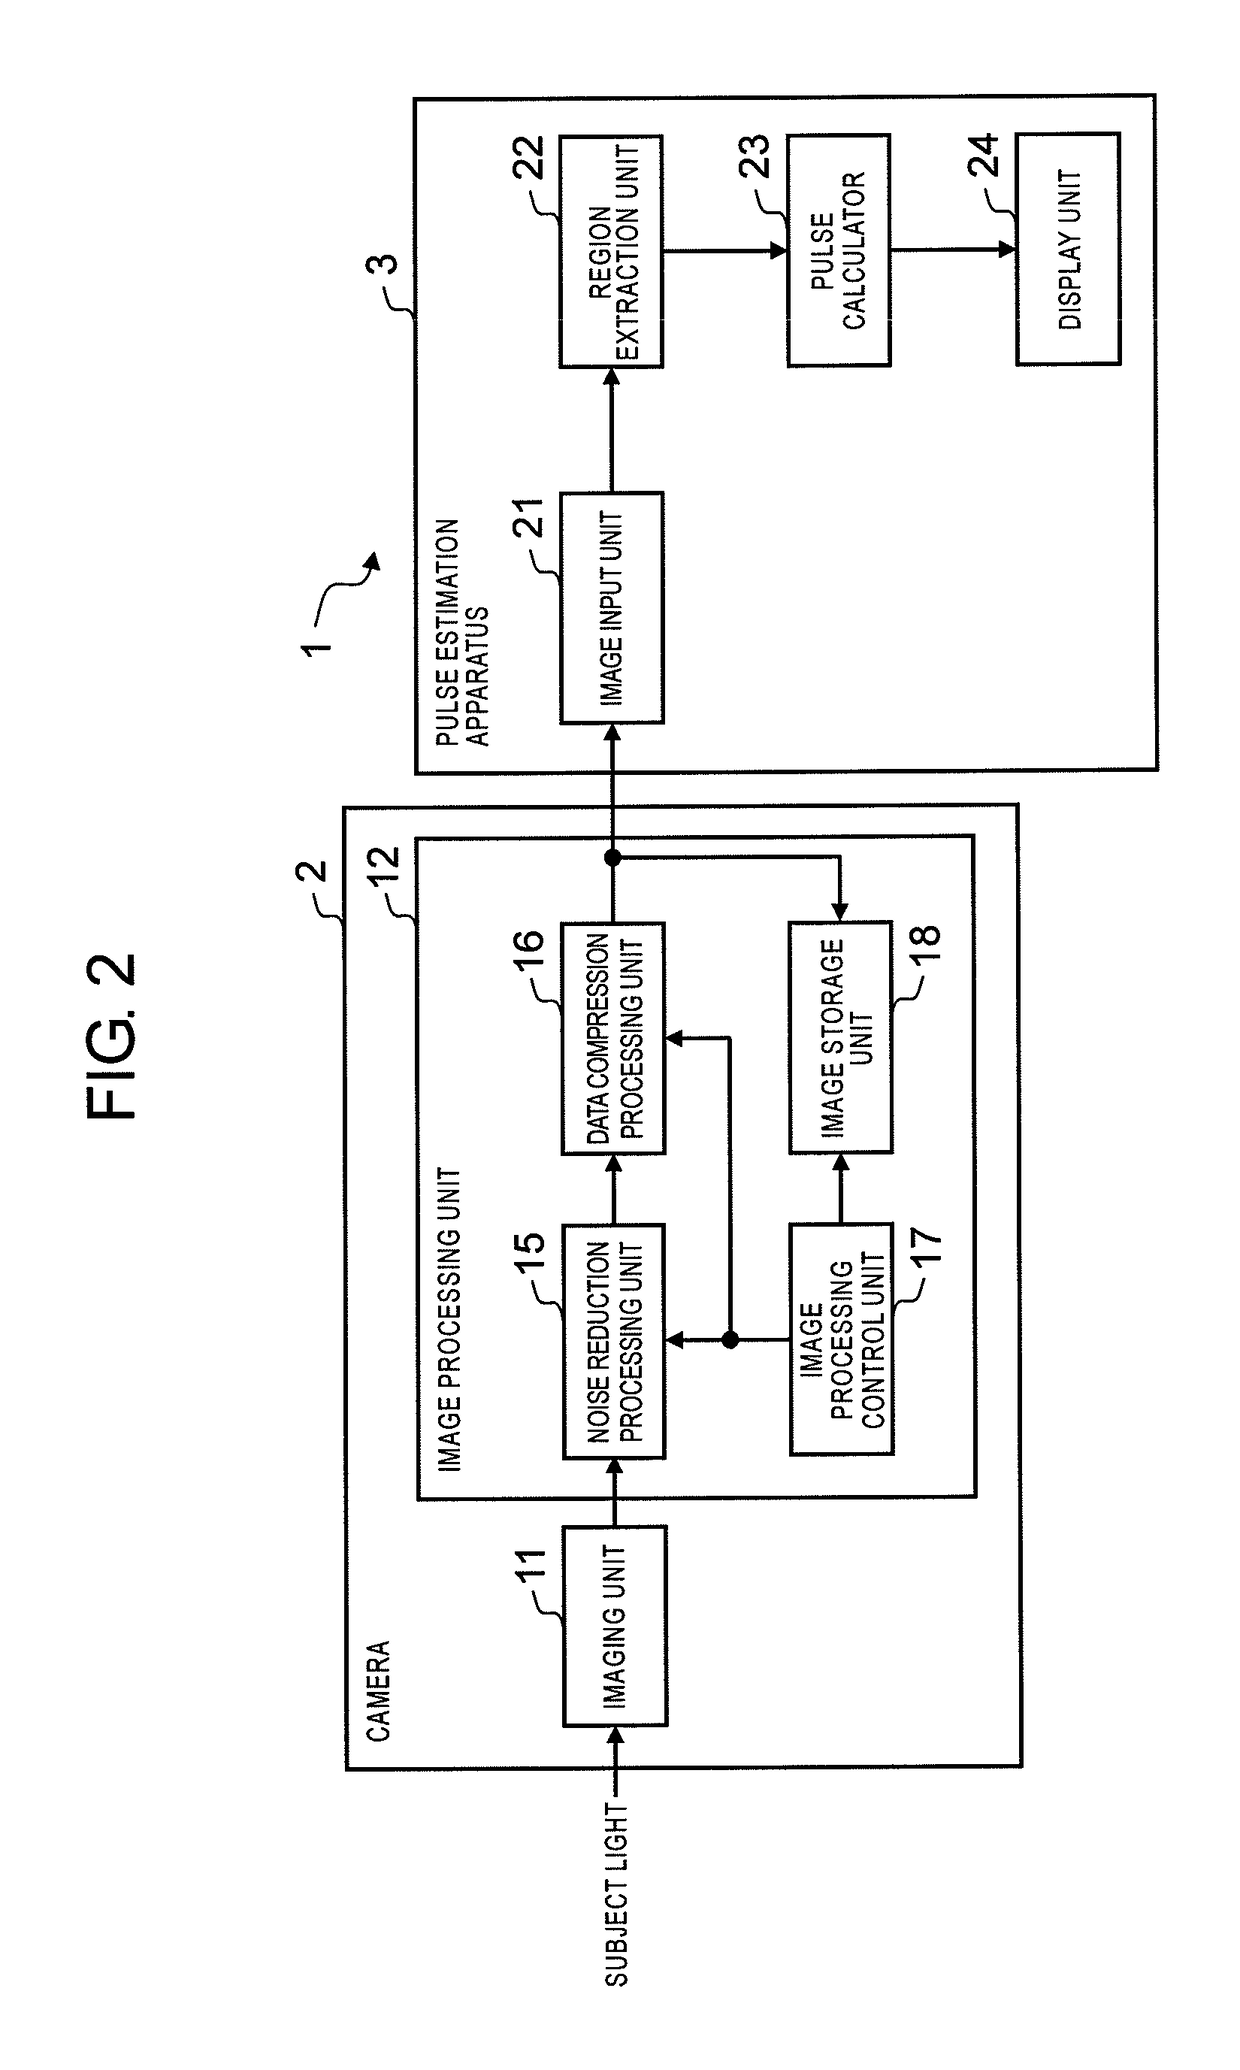 Image processing apparatus and pulse estimation system provided therewith, and image processing method